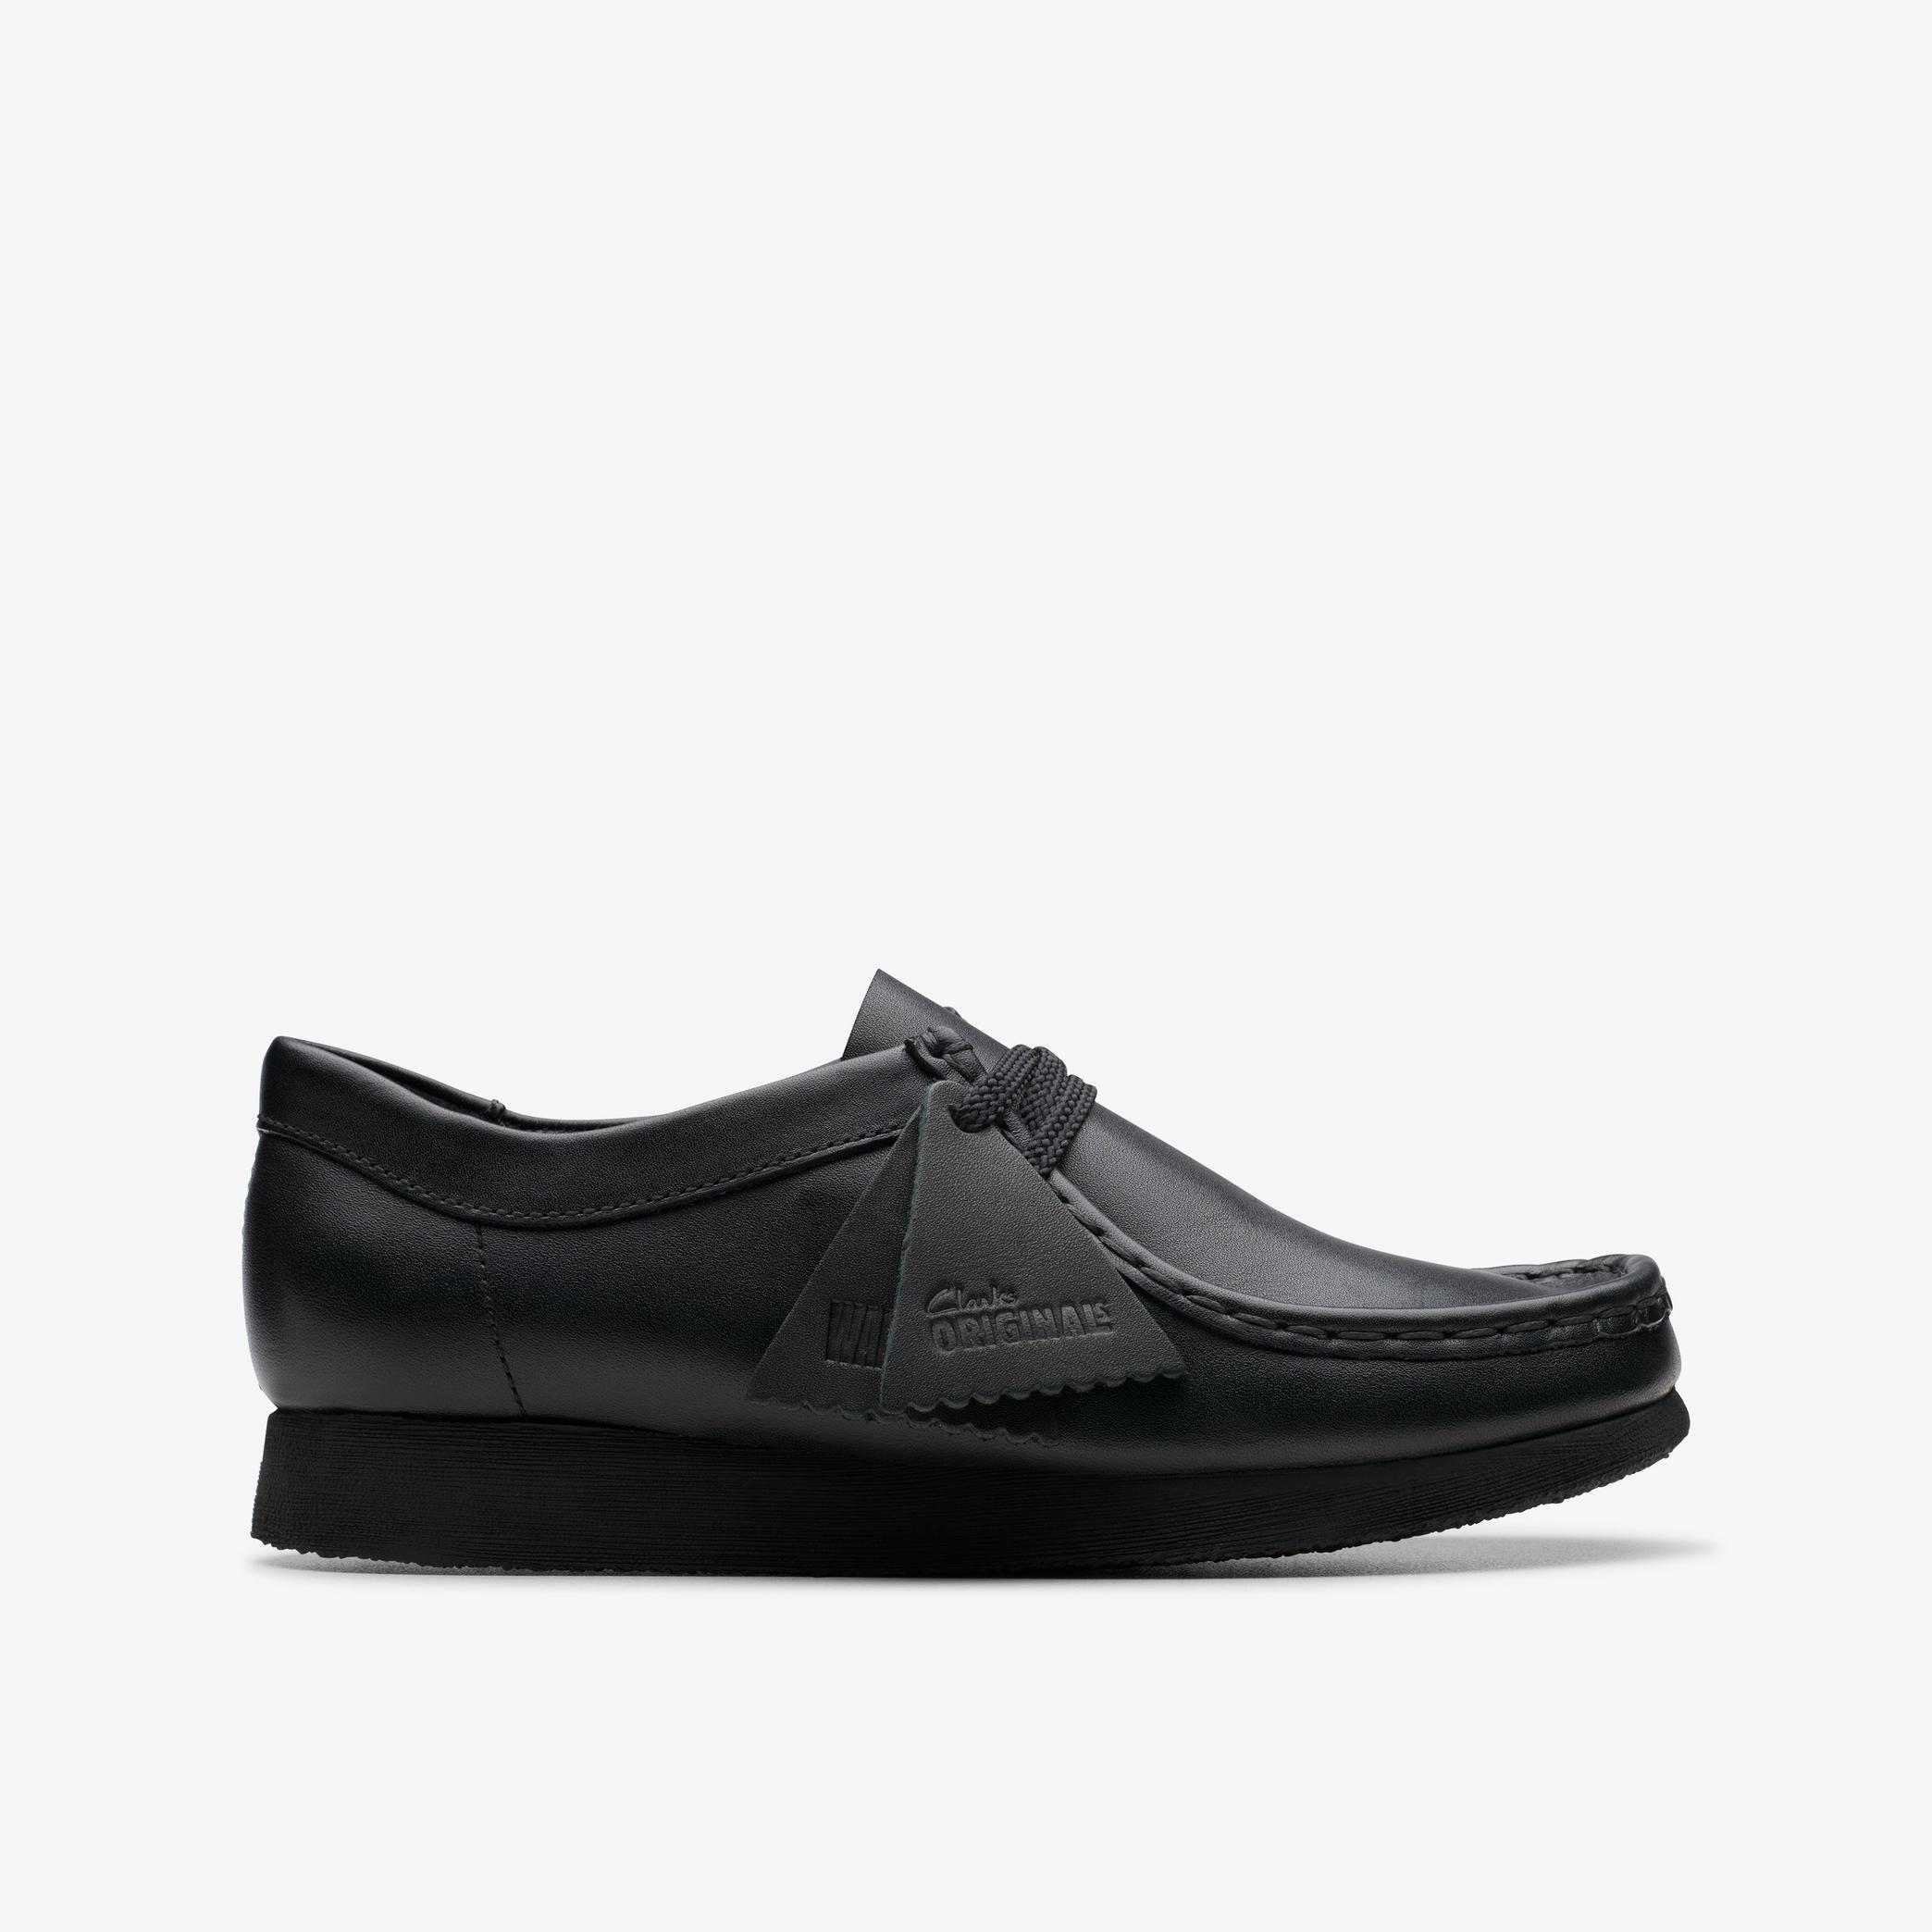 Wallabee Older Black Leather Shoes, view 1 of 6